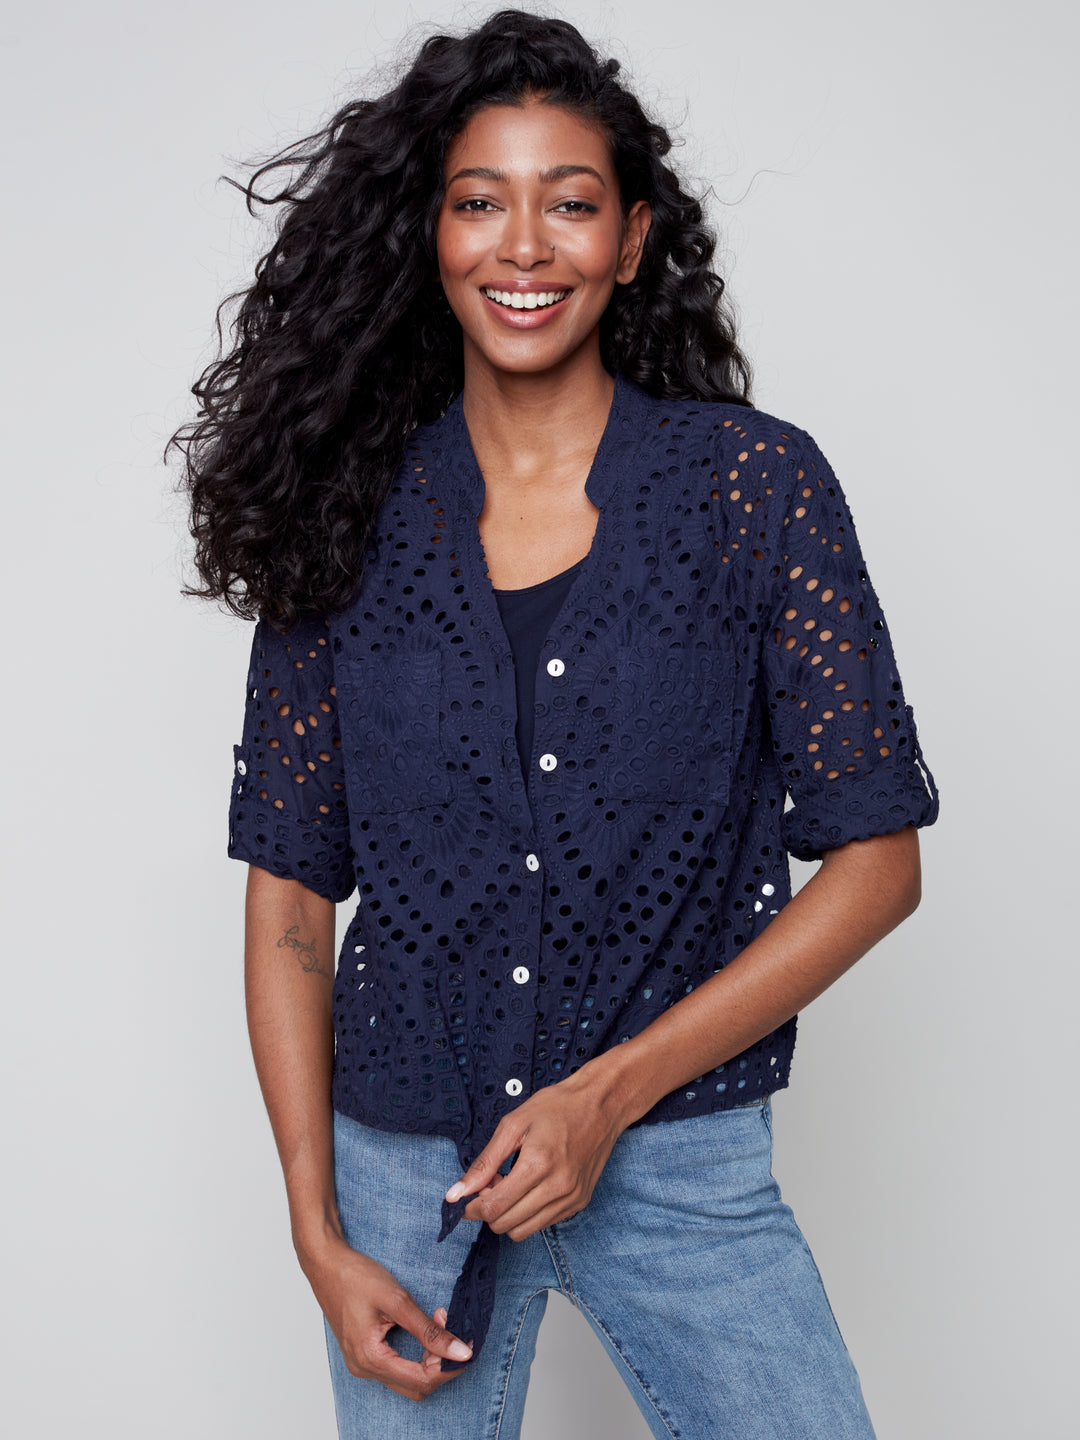 Eyelet Embroidery Front Tie Cotton Blouse - C4467